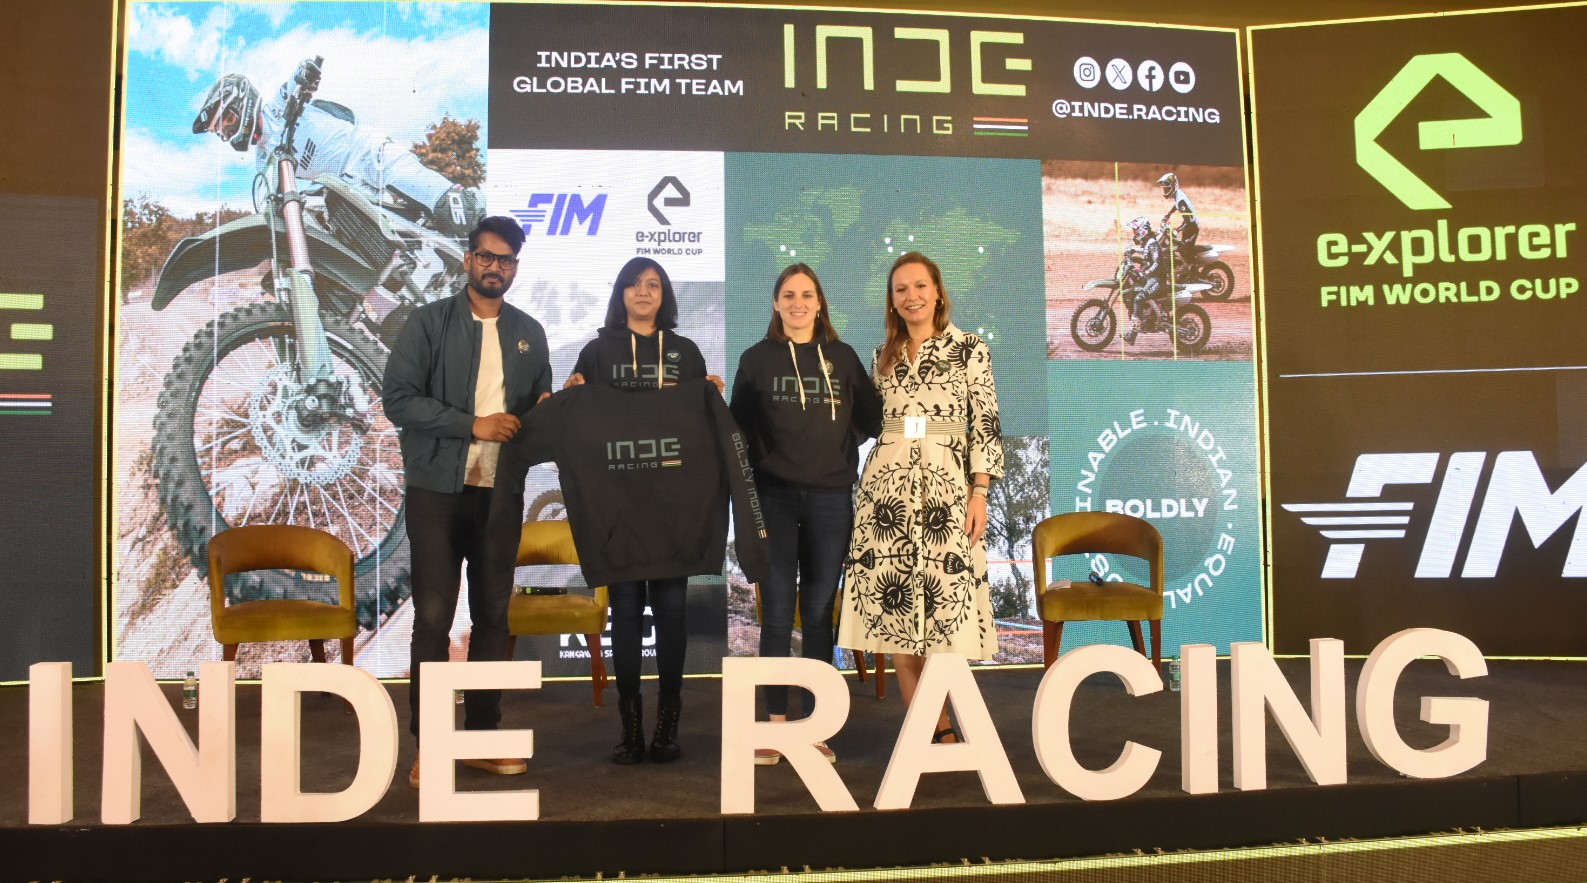 2024 E-Xplorer A glimpse into off-road racing World Cup where India's 1st motorbike team 'INDE Racing' is set to compete